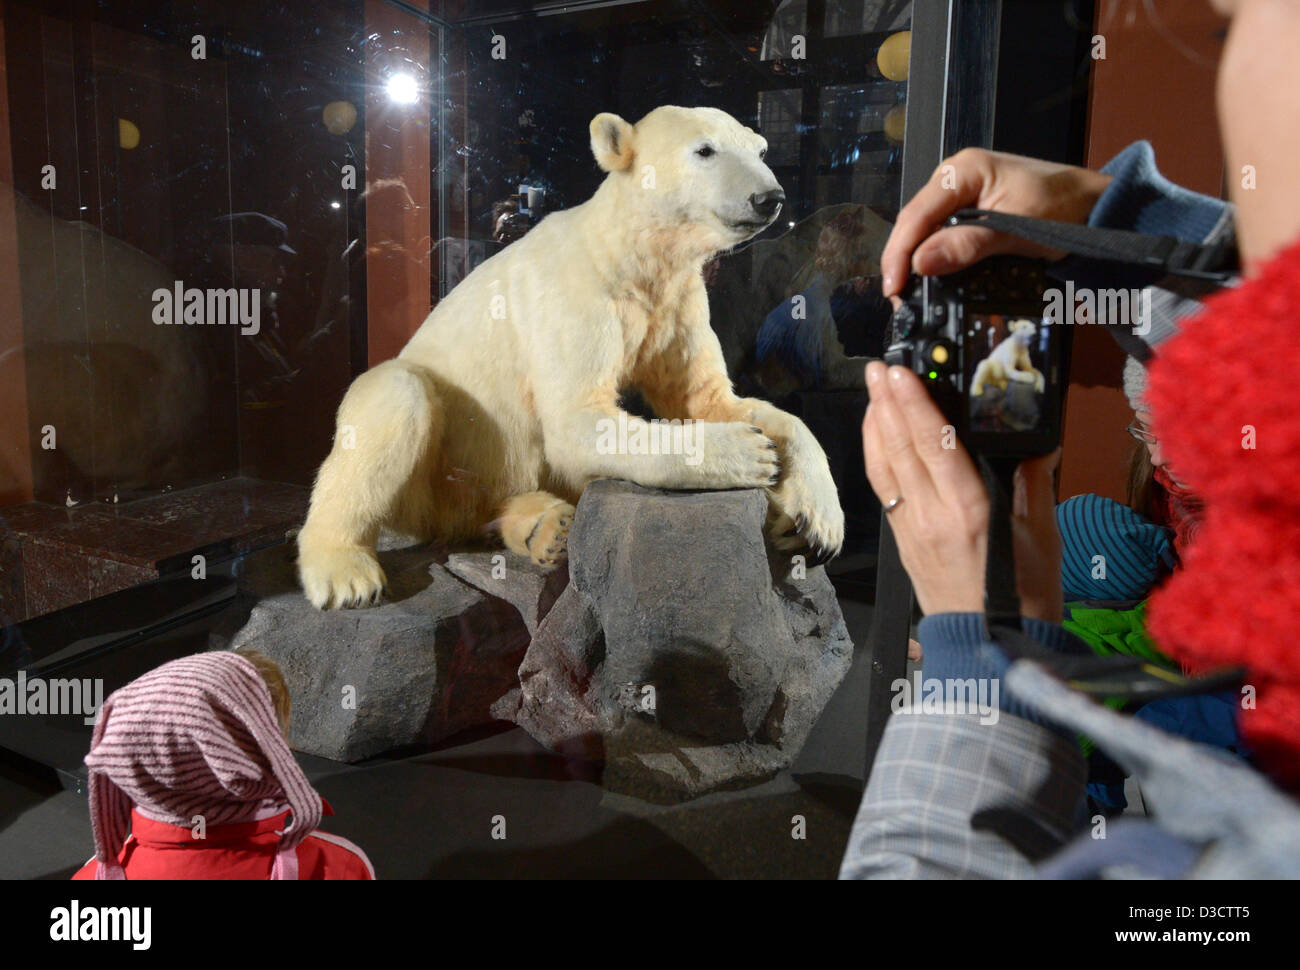 A model of polar bear Knut is exhibited at the Museum of Natural History in Berlin, Germany, 16 February 2013. According to reports, Knut's body was not stuffed, but his fur was used in the sculpture. The polar bear is exhibited at the museum for one month from 16 February. Knut achieved world-wide fame in Berlin Zoo until his untimely death in 2011. Photo: Rainer Jensen Stock Photo